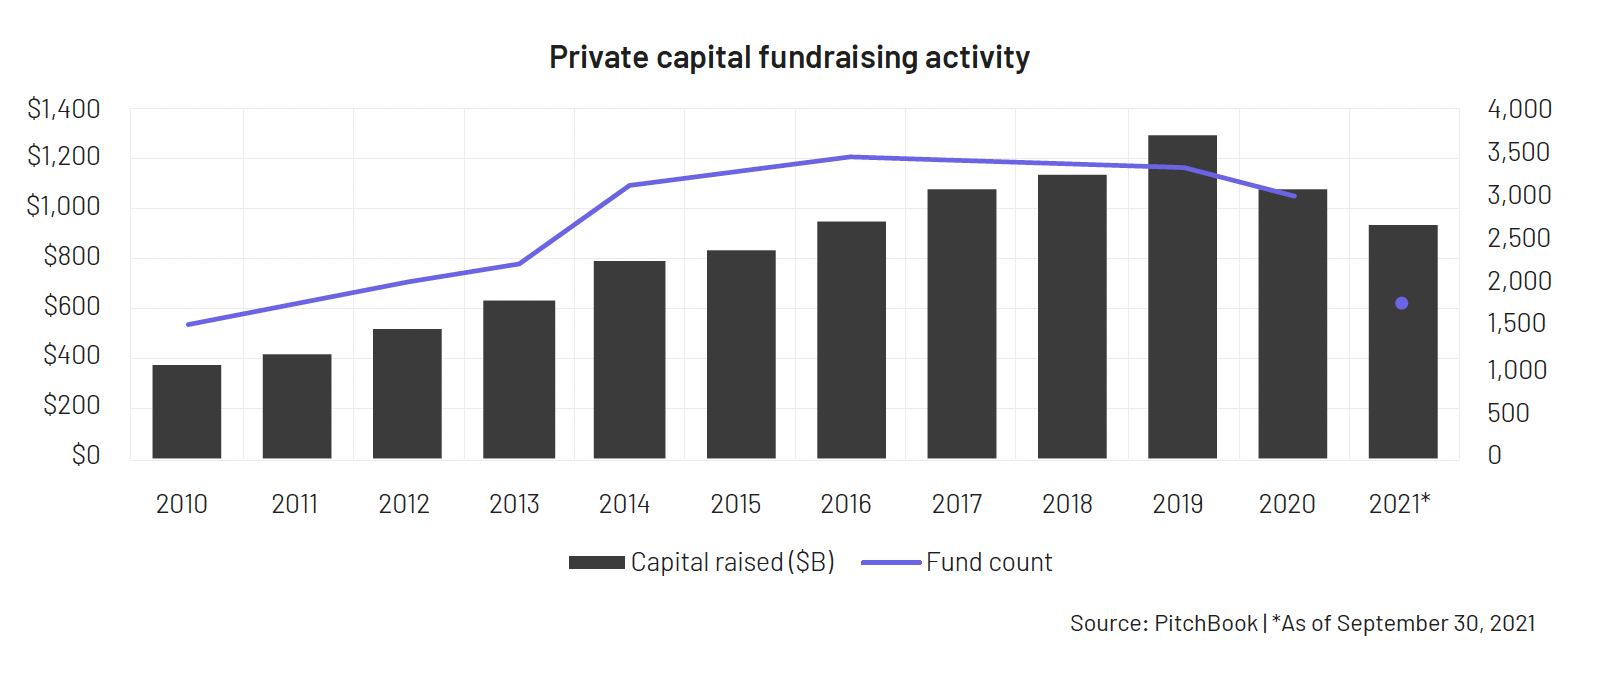 Private capital fundraising activity